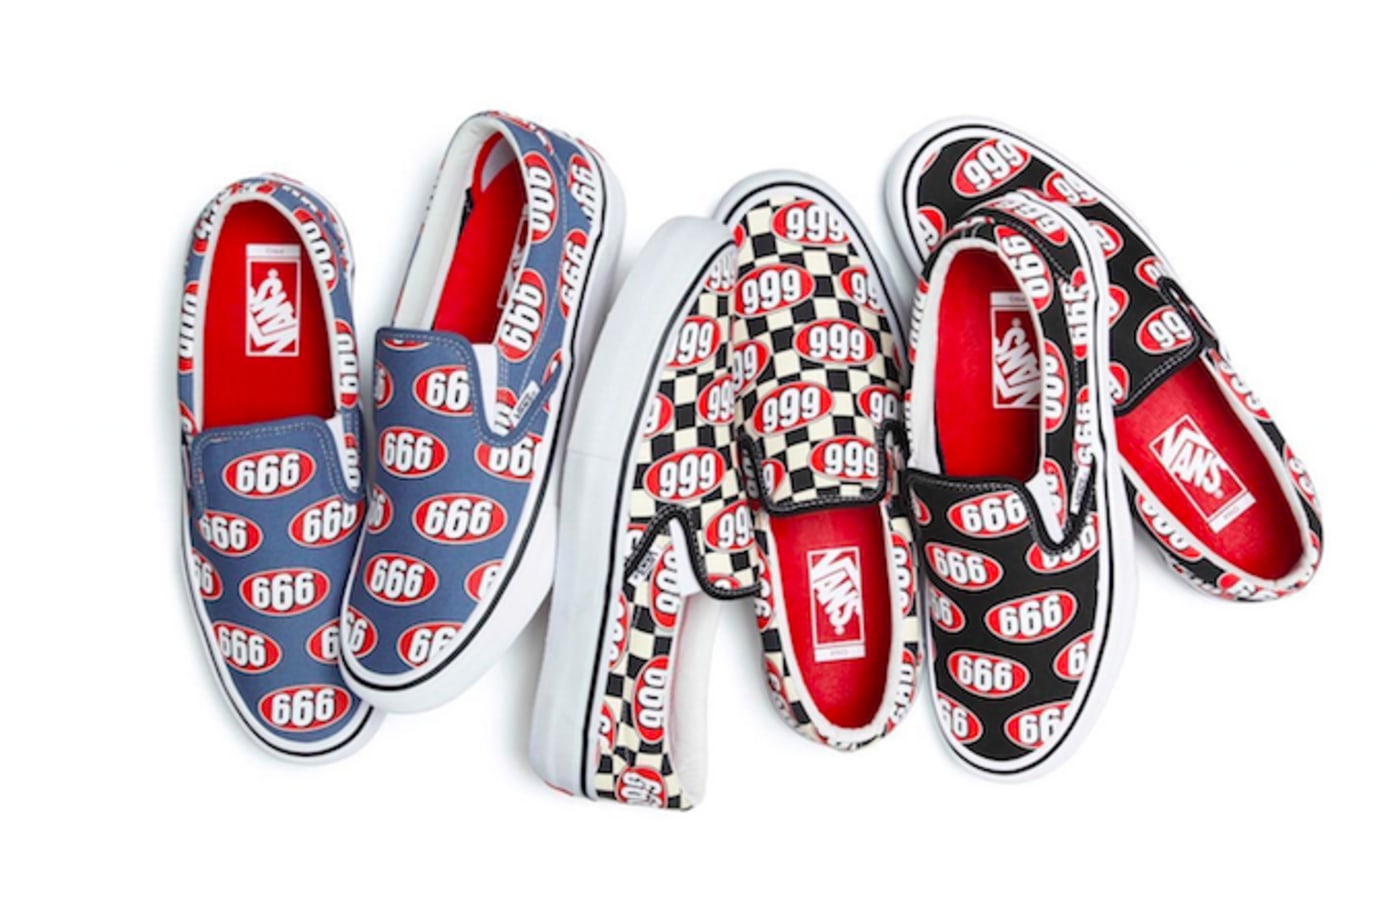 The Supreme x Vans “666” Slip-On Pack Is Dropping This Week | Complex